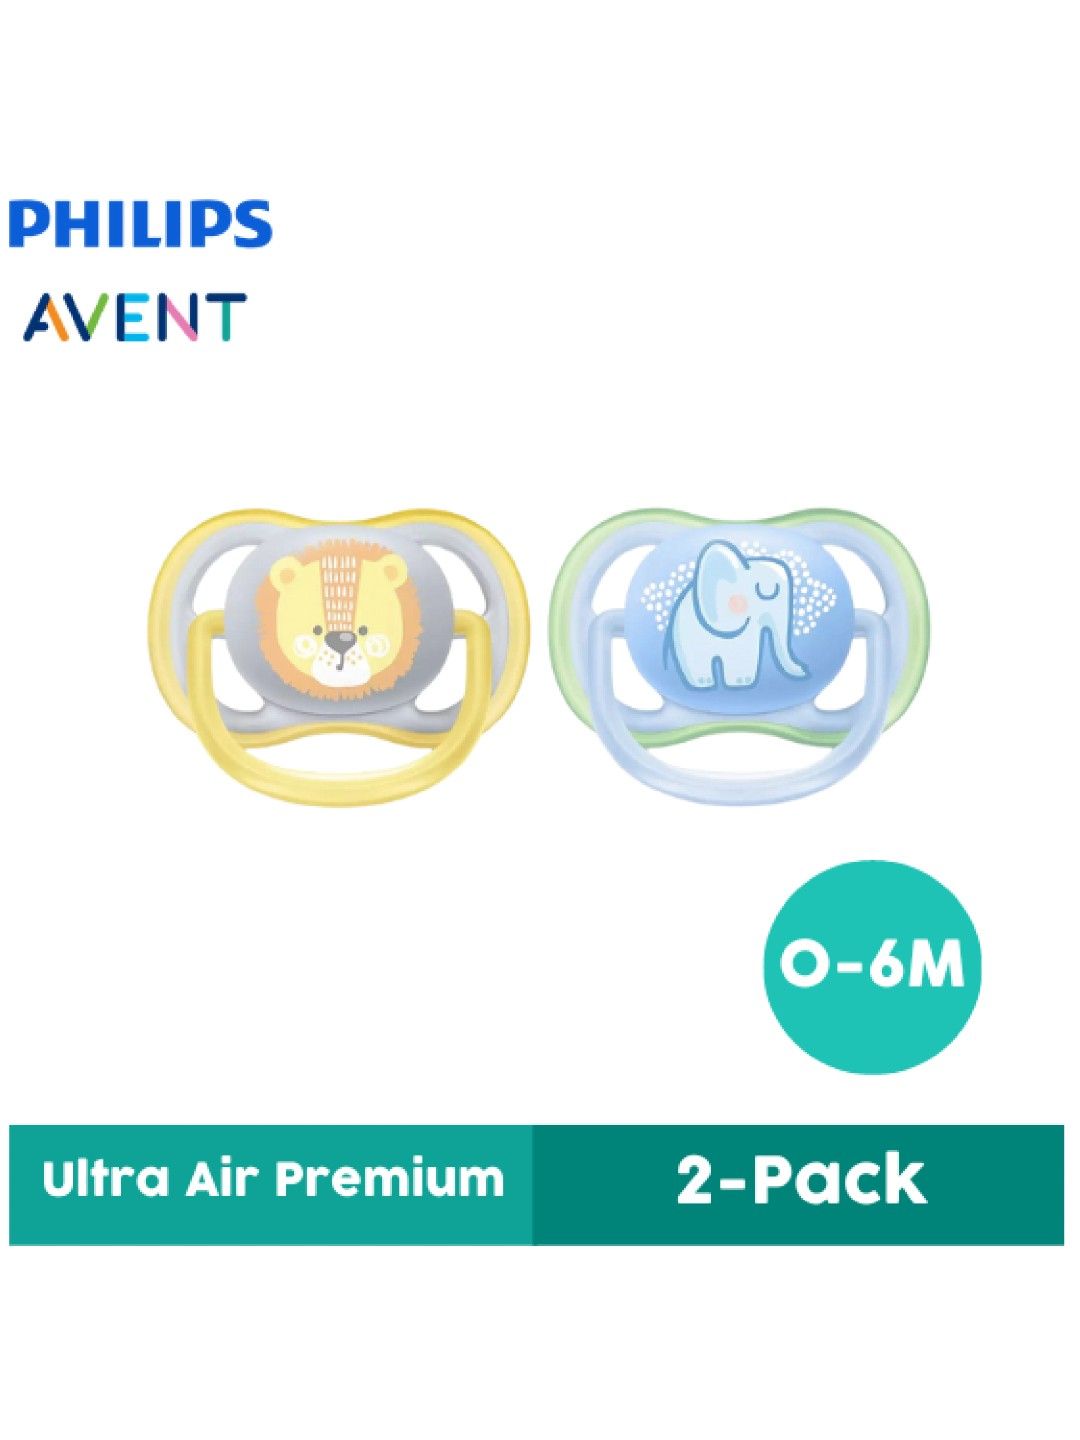 Avent Philips Avent 0-6M Ultra Air Premium Pacifier (2-pack)